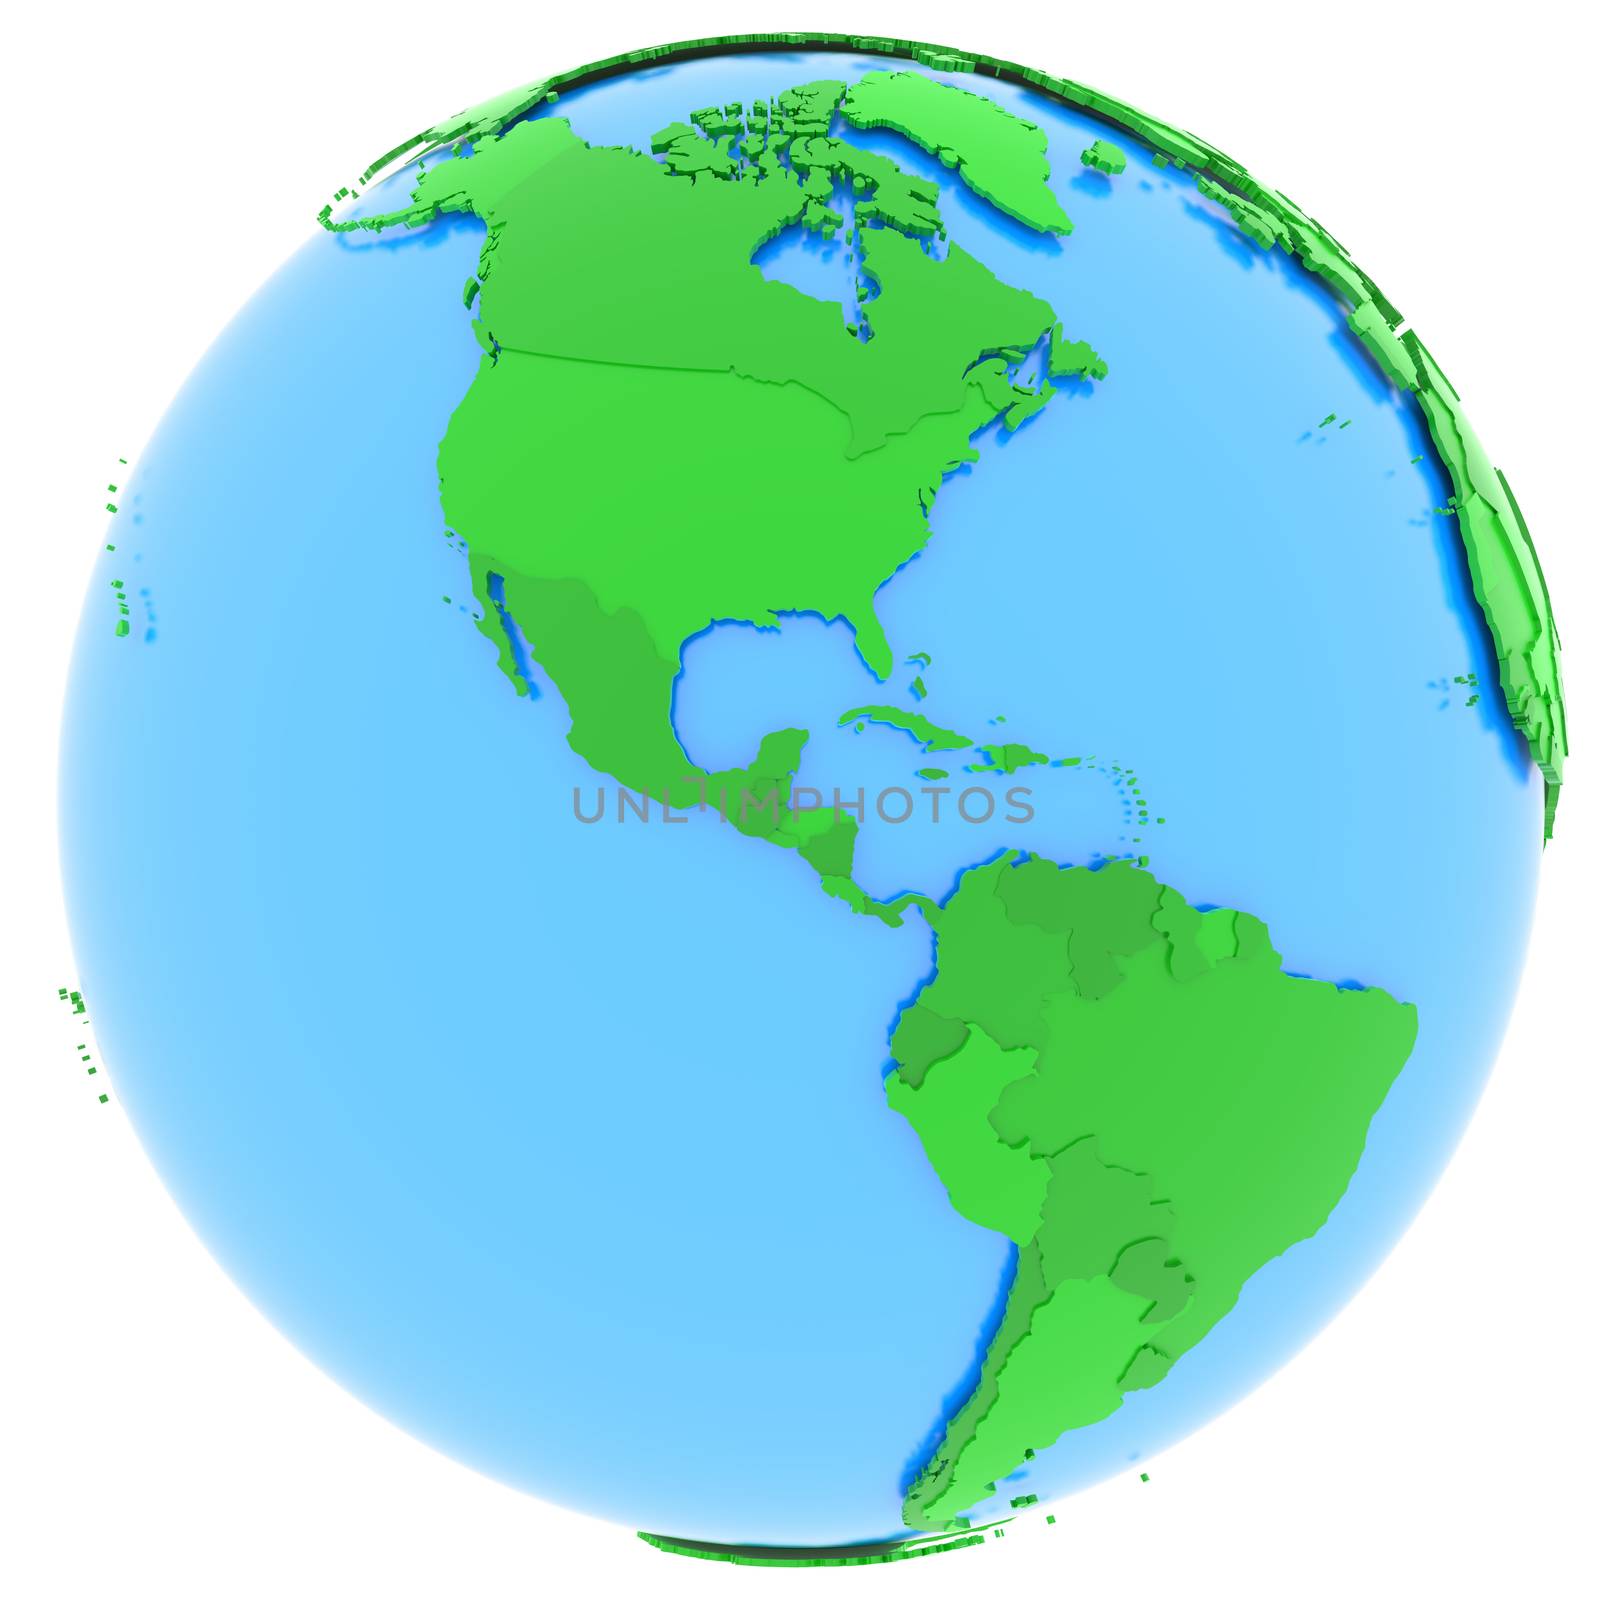 North and South America on Earth by Harvepino